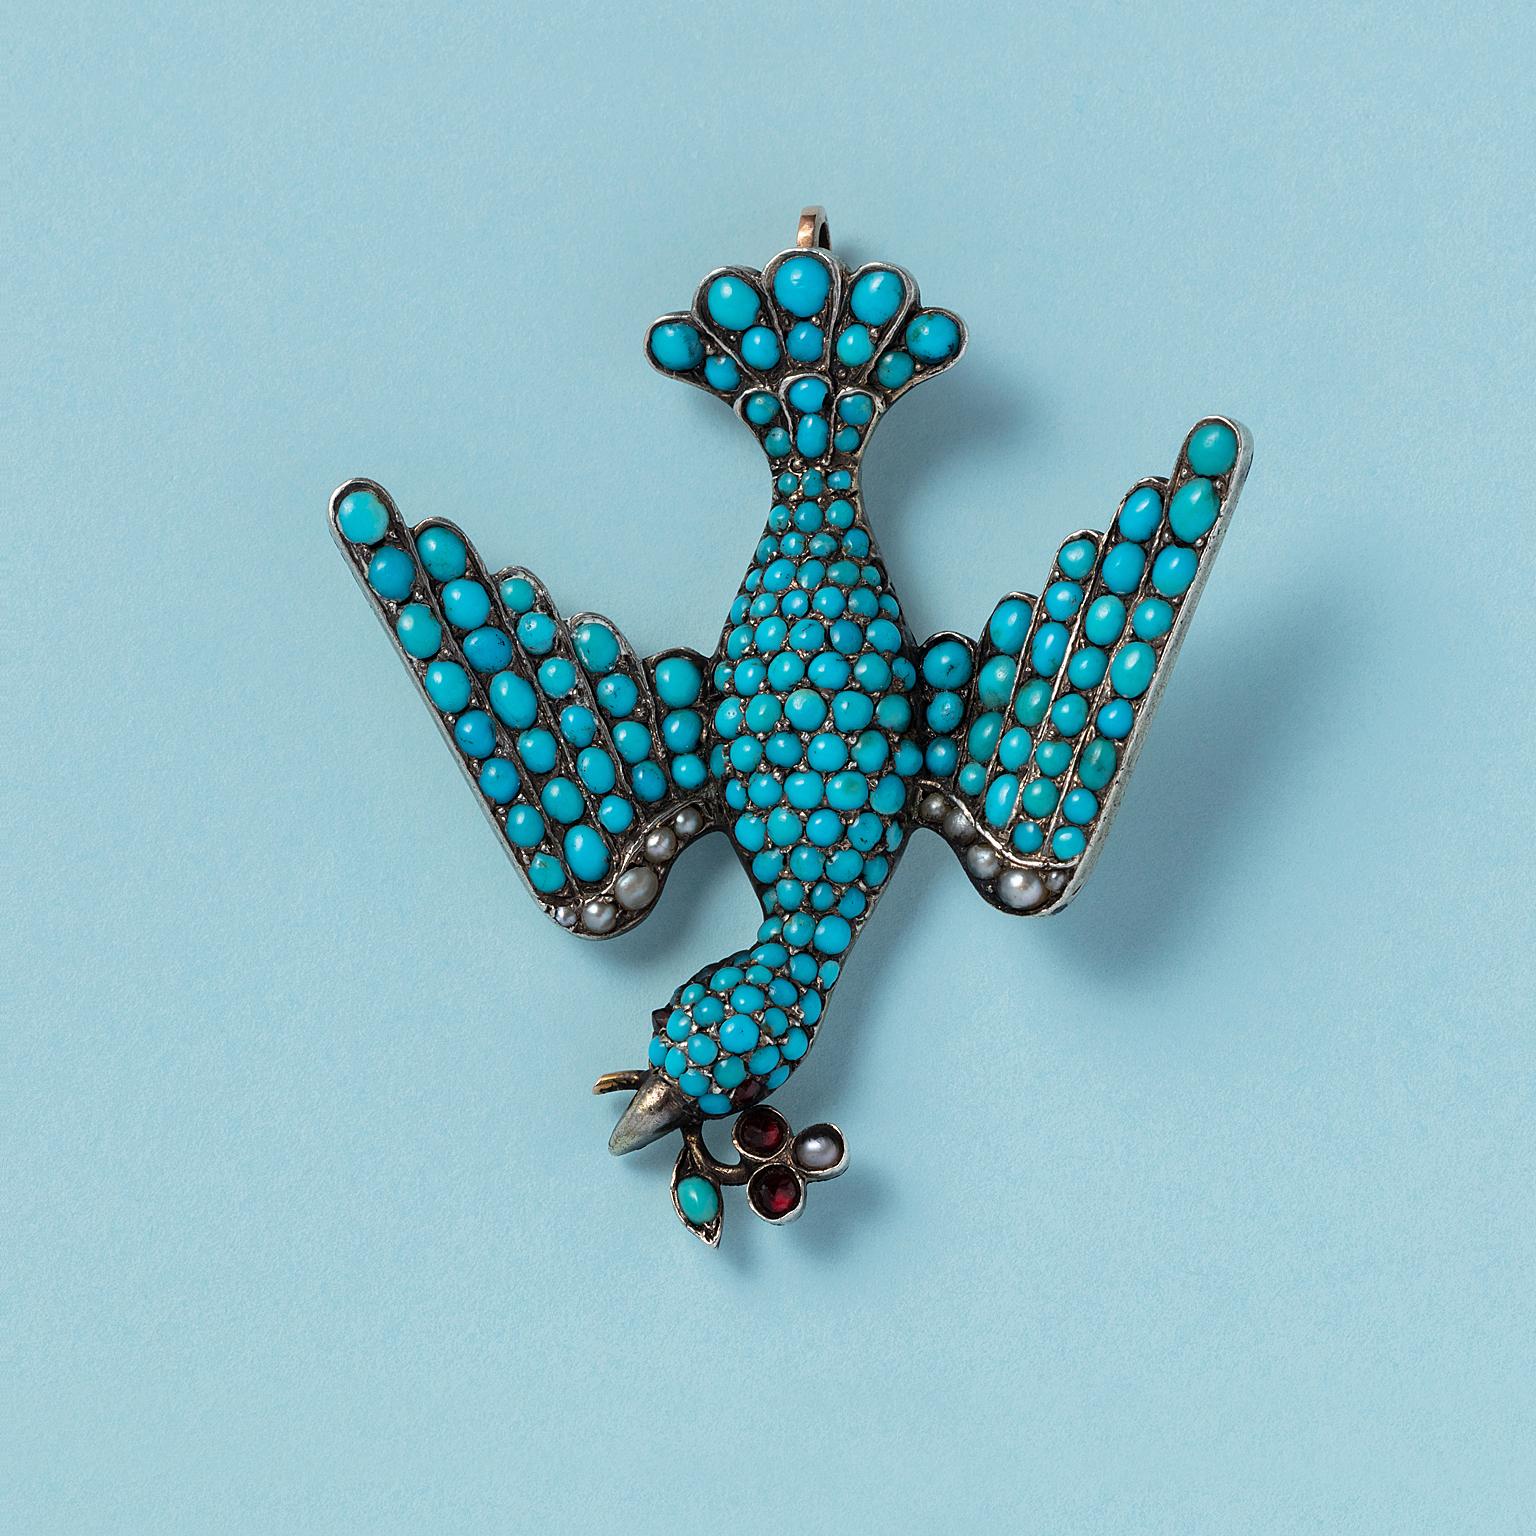 A large Georgian dove 9-carat gold pendant (brooch conversion). The bird is pavé-set with vibrant cabochon cut turquoise. It carries a stylized branch of garnets, pearl, and turquoise in its beak, England, circa 1820.

weight: 14.71 grams
length: